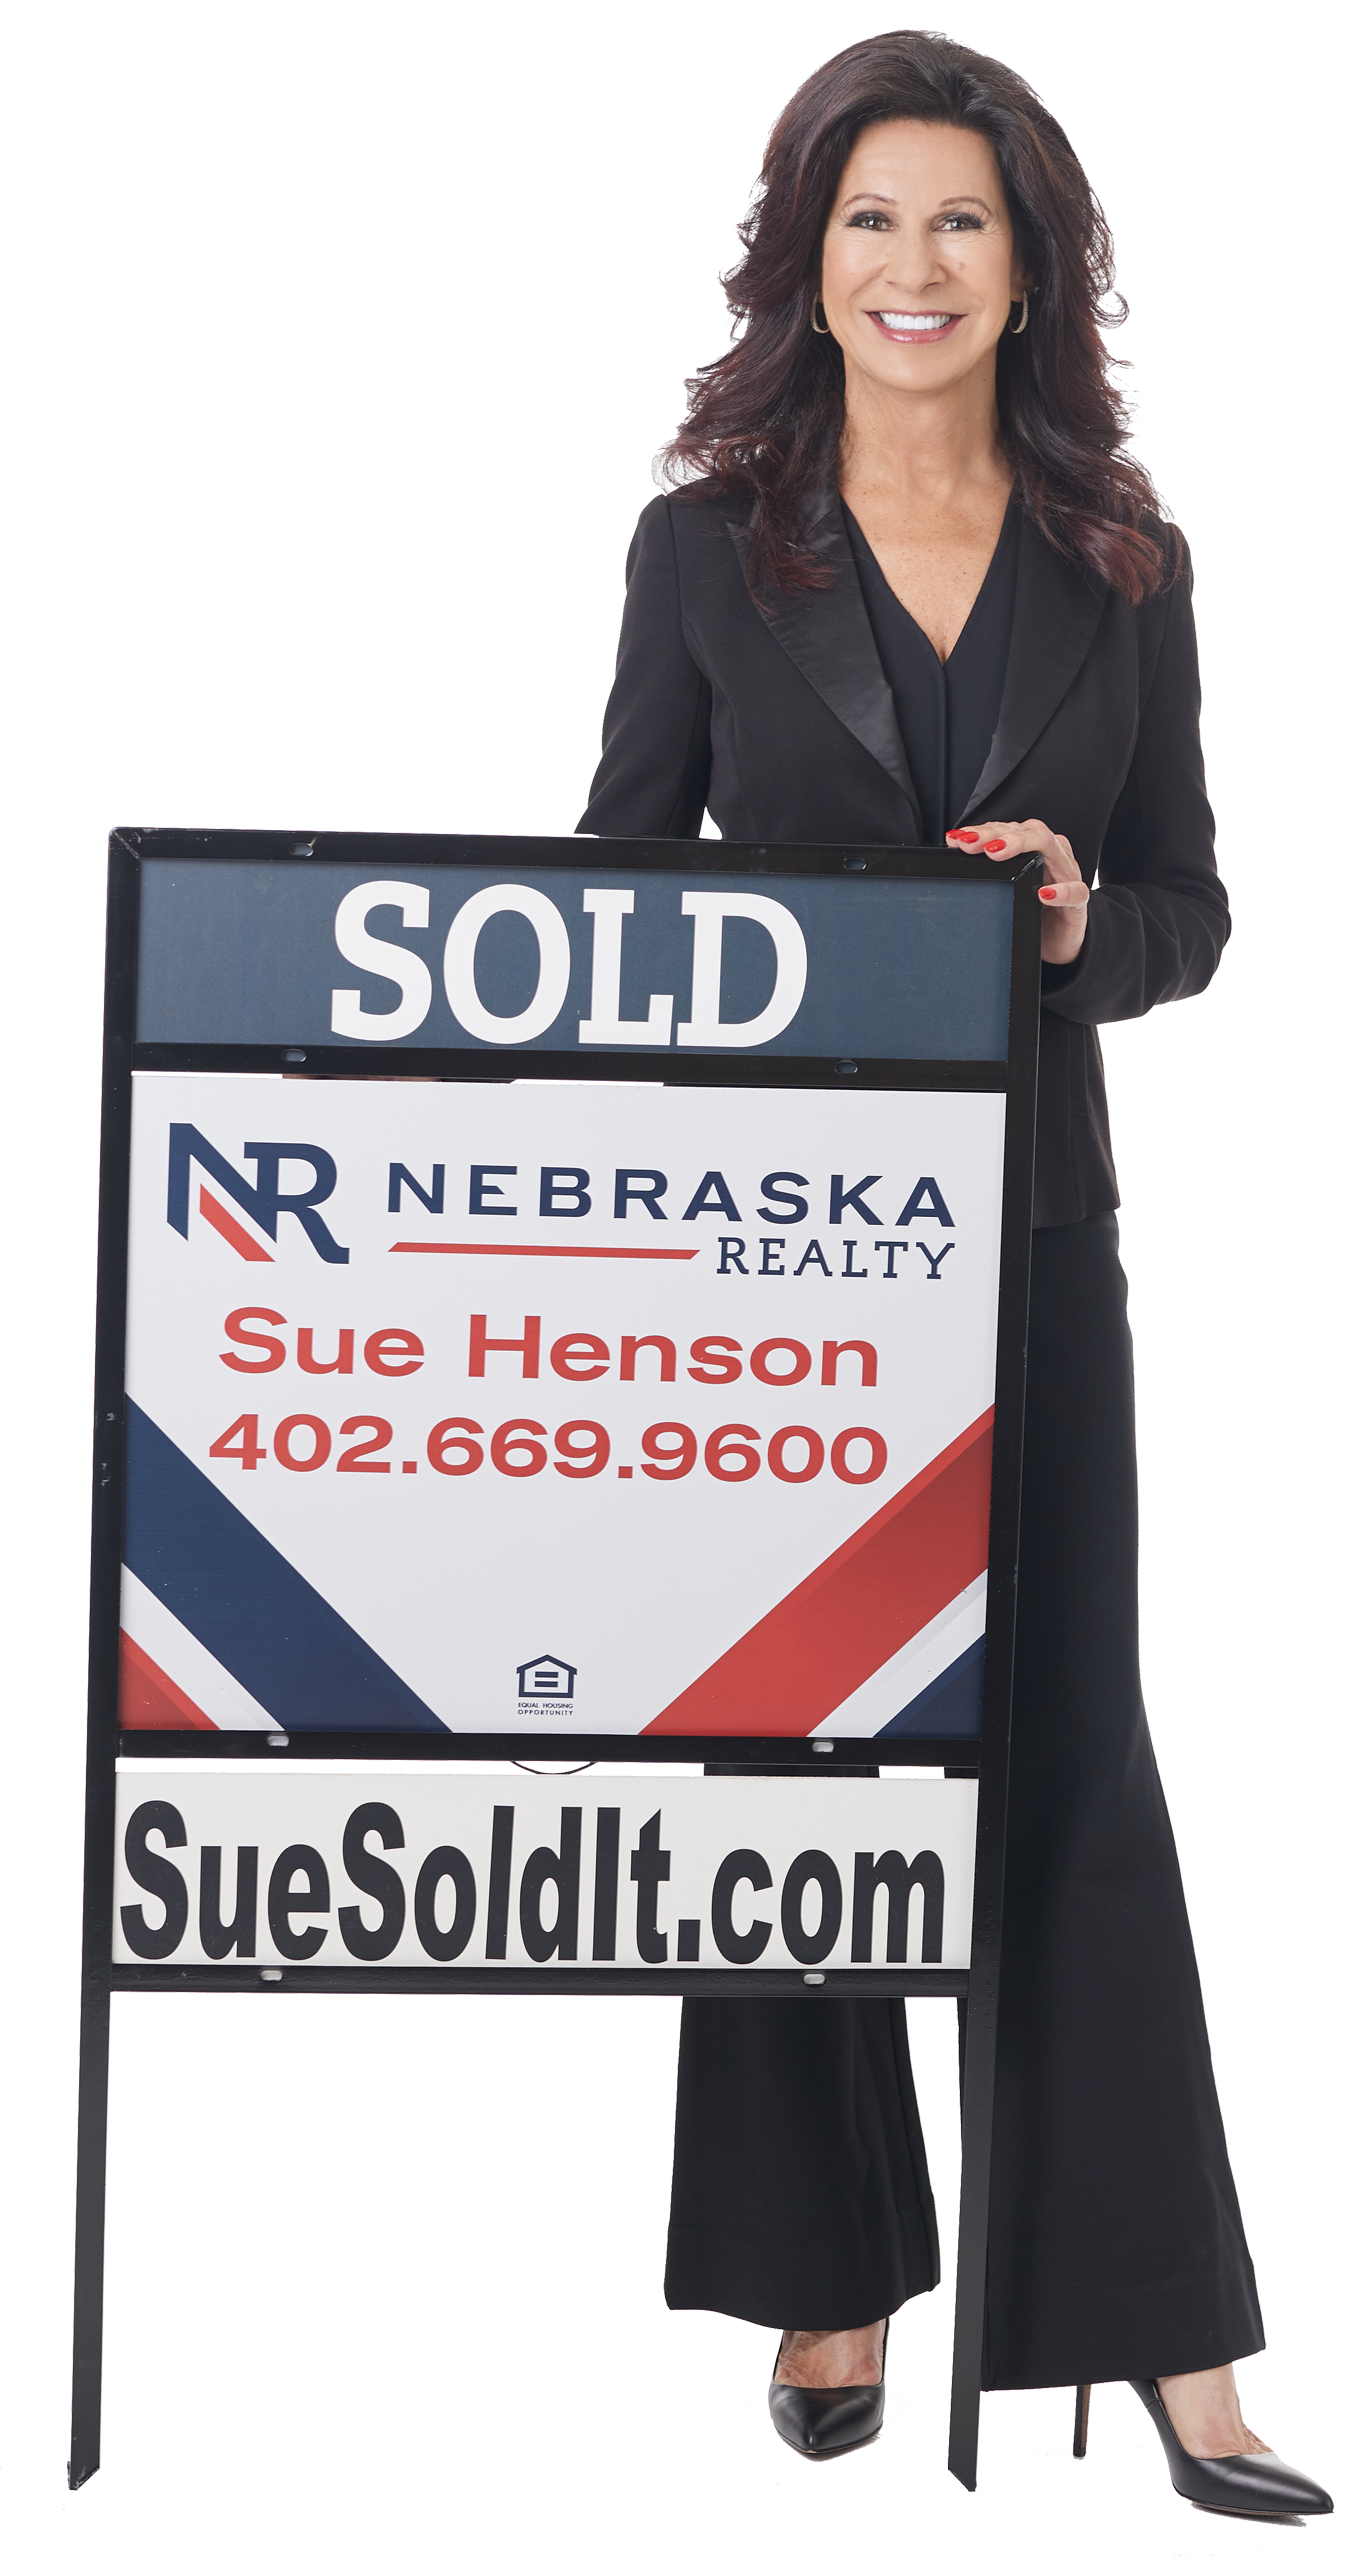 sue henson standing next to her sold sign for Nebraska Realty